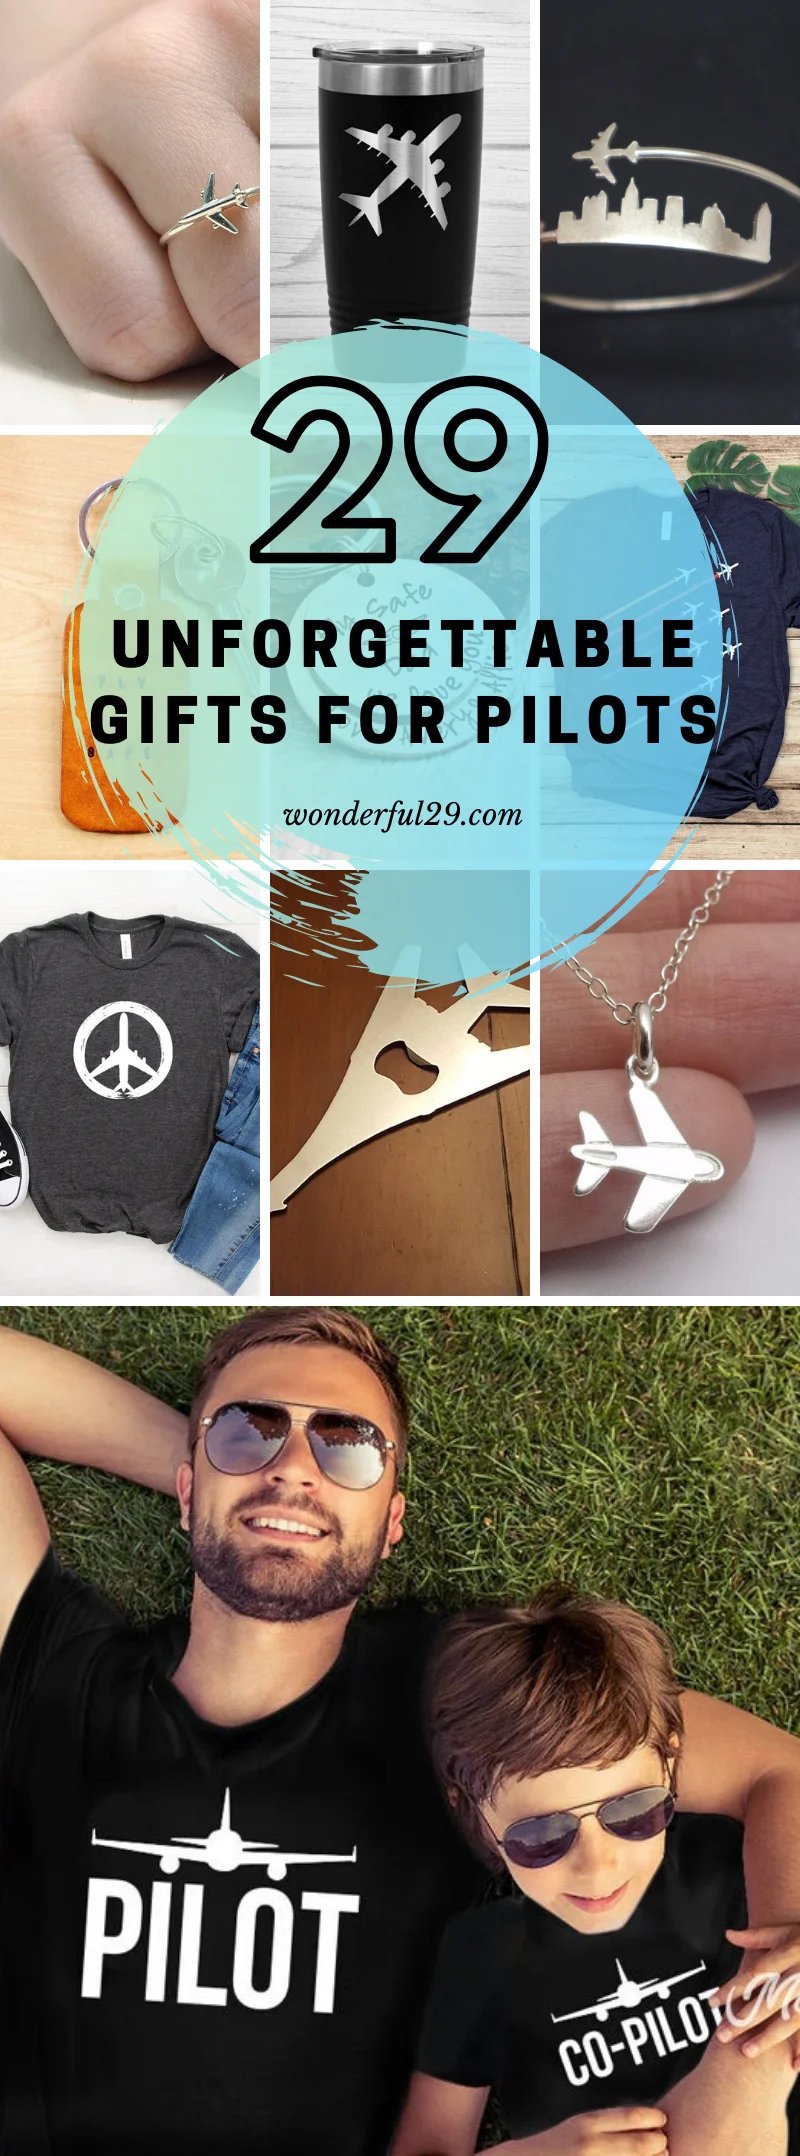 The most amazing gifts for pilots | Pilot gifts, Funny retirement gifts,  Pilot